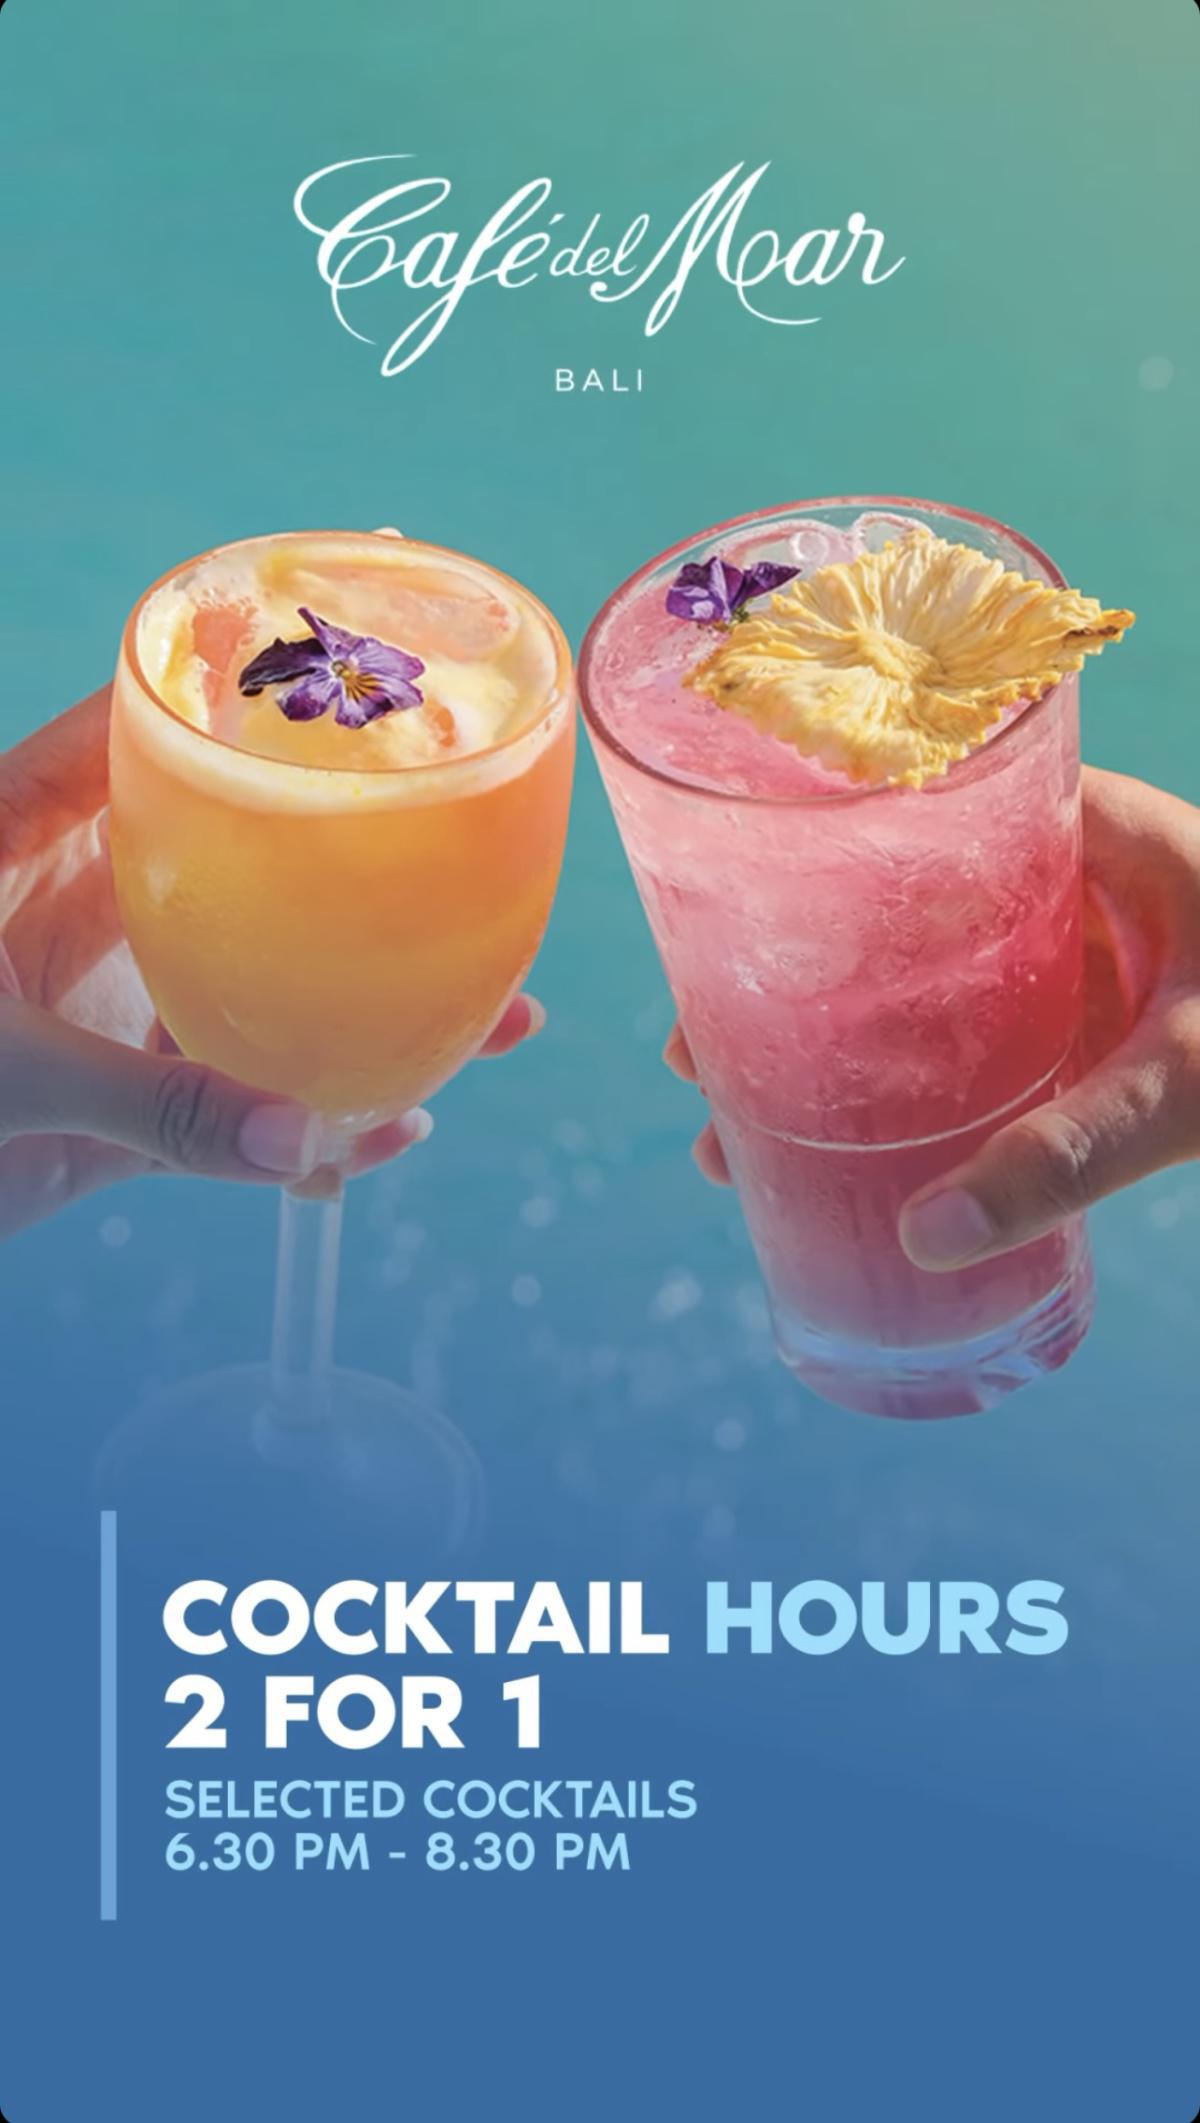 Cafe del Mar - Cocktails Hours 2 for 1 6:30 PM-8:30 PM